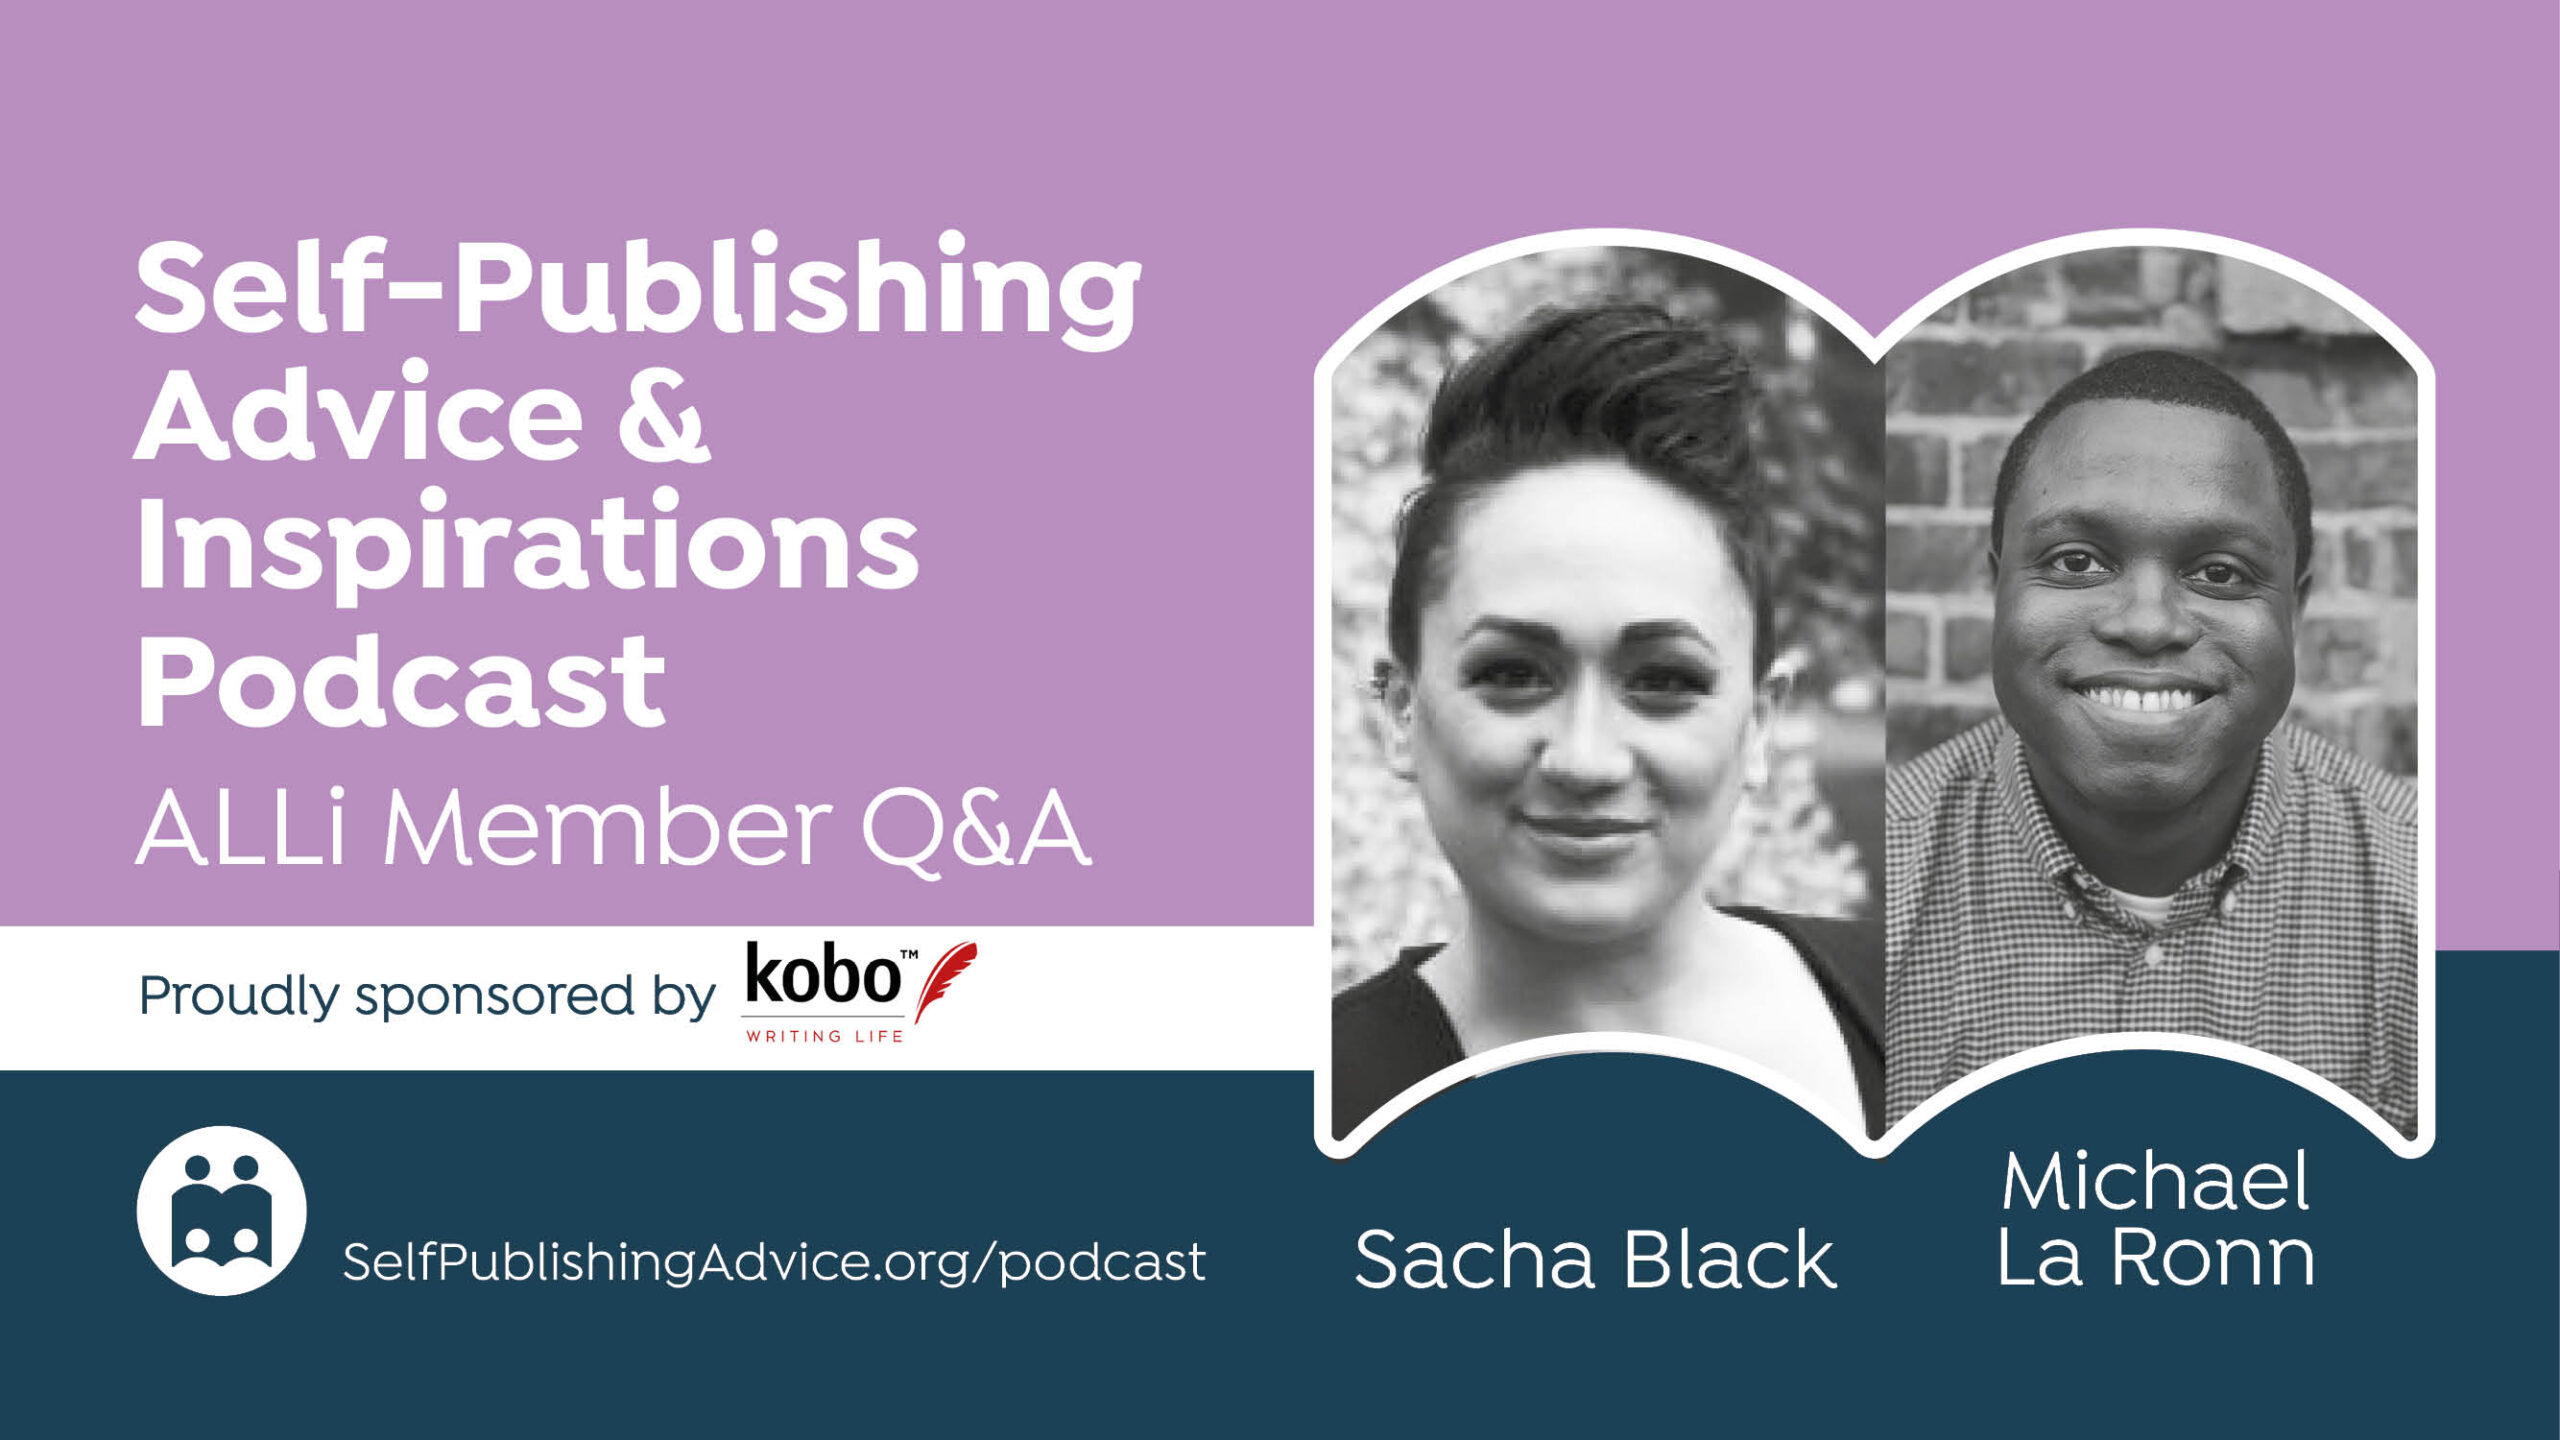 Unlimited Marketing, Extra-Long Novels, IngramSpark Basics, And More Questions Answered By Michael La Ronn And Orna Ross In Our Member Q&A Podcast